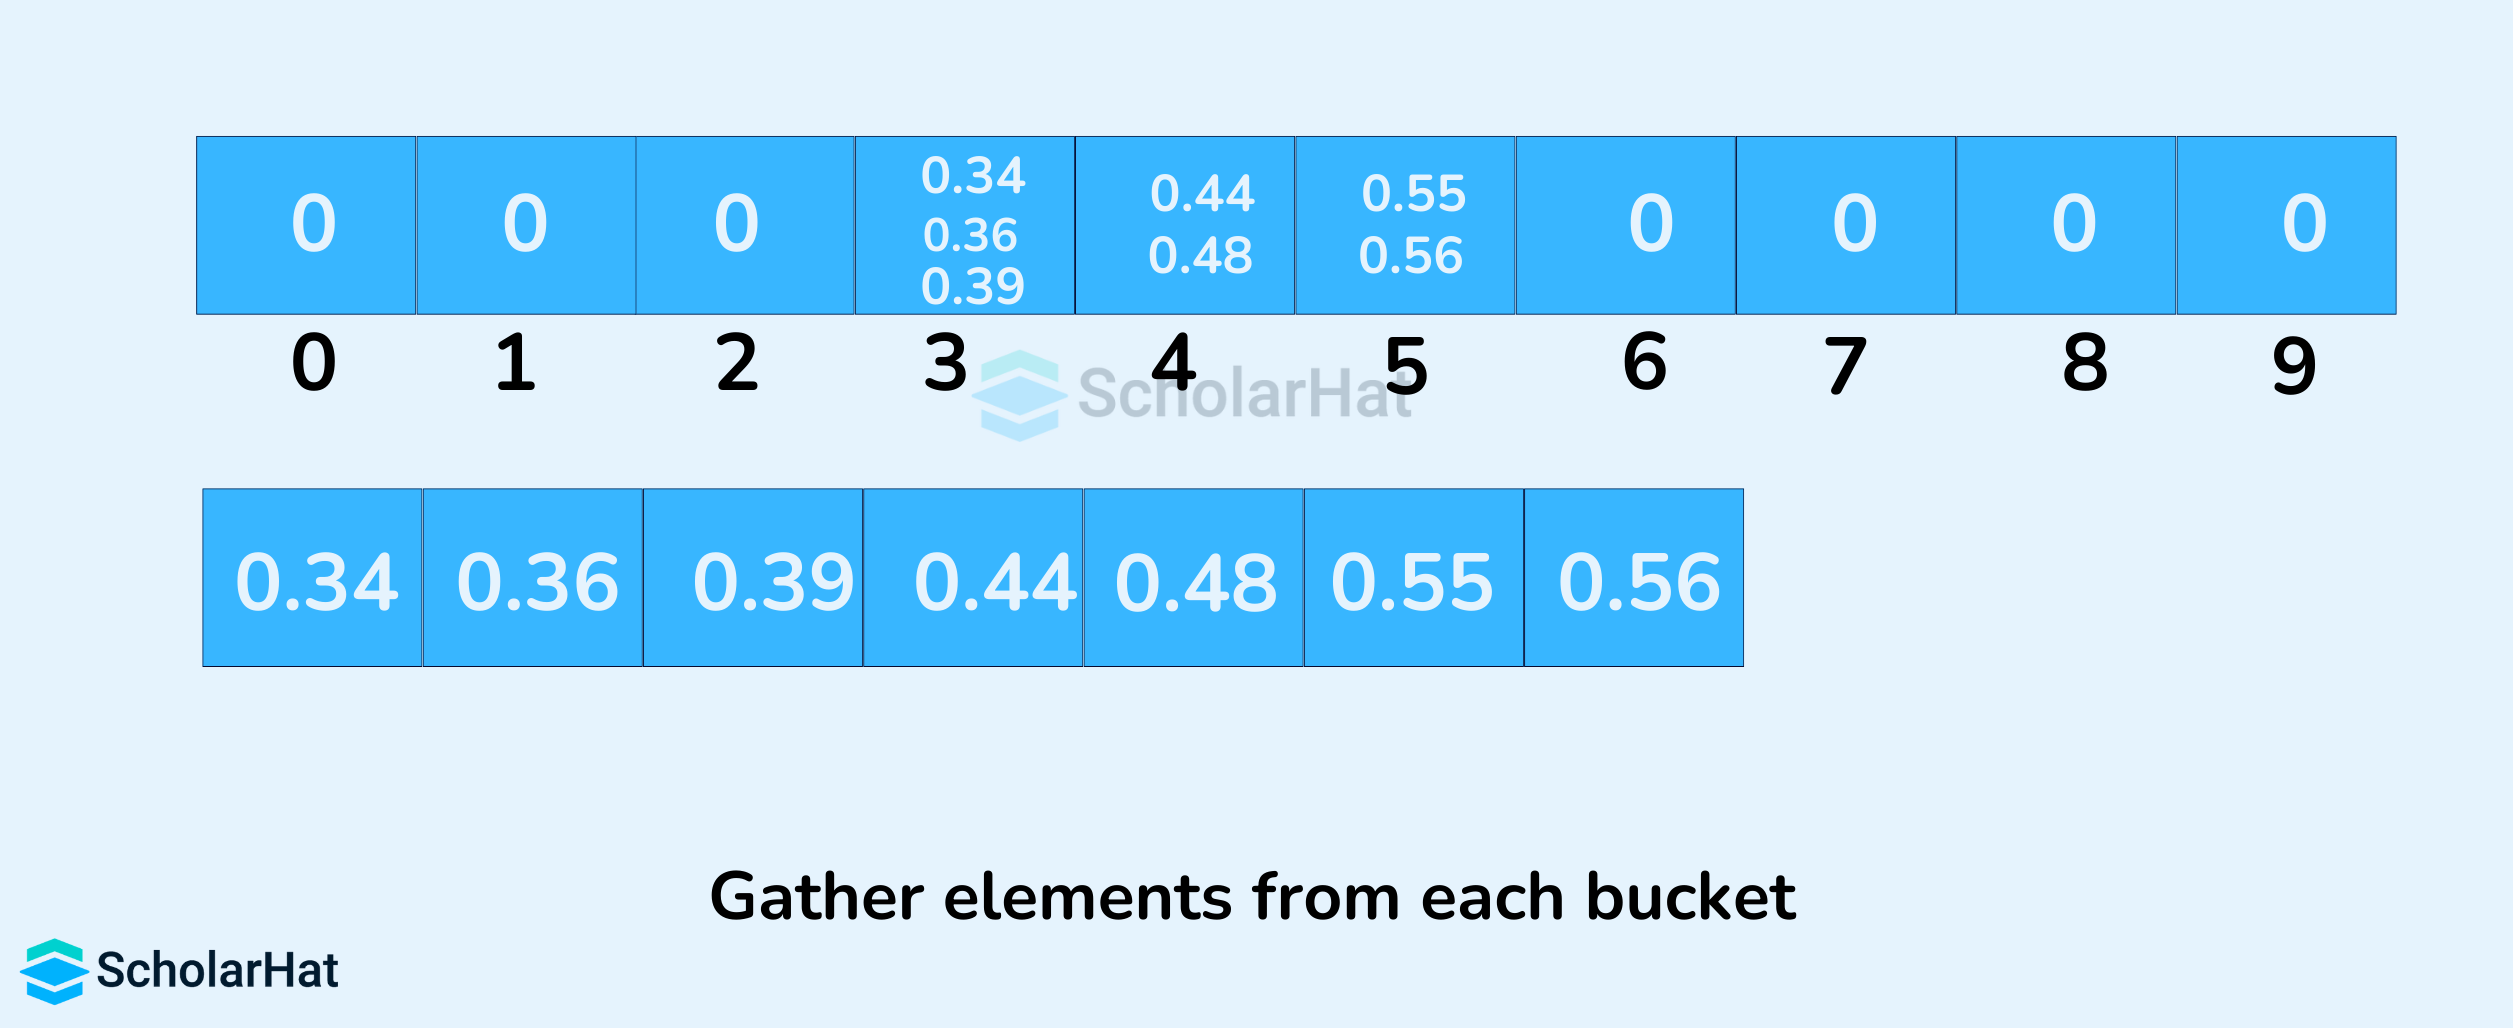 Gather elements from each bucket